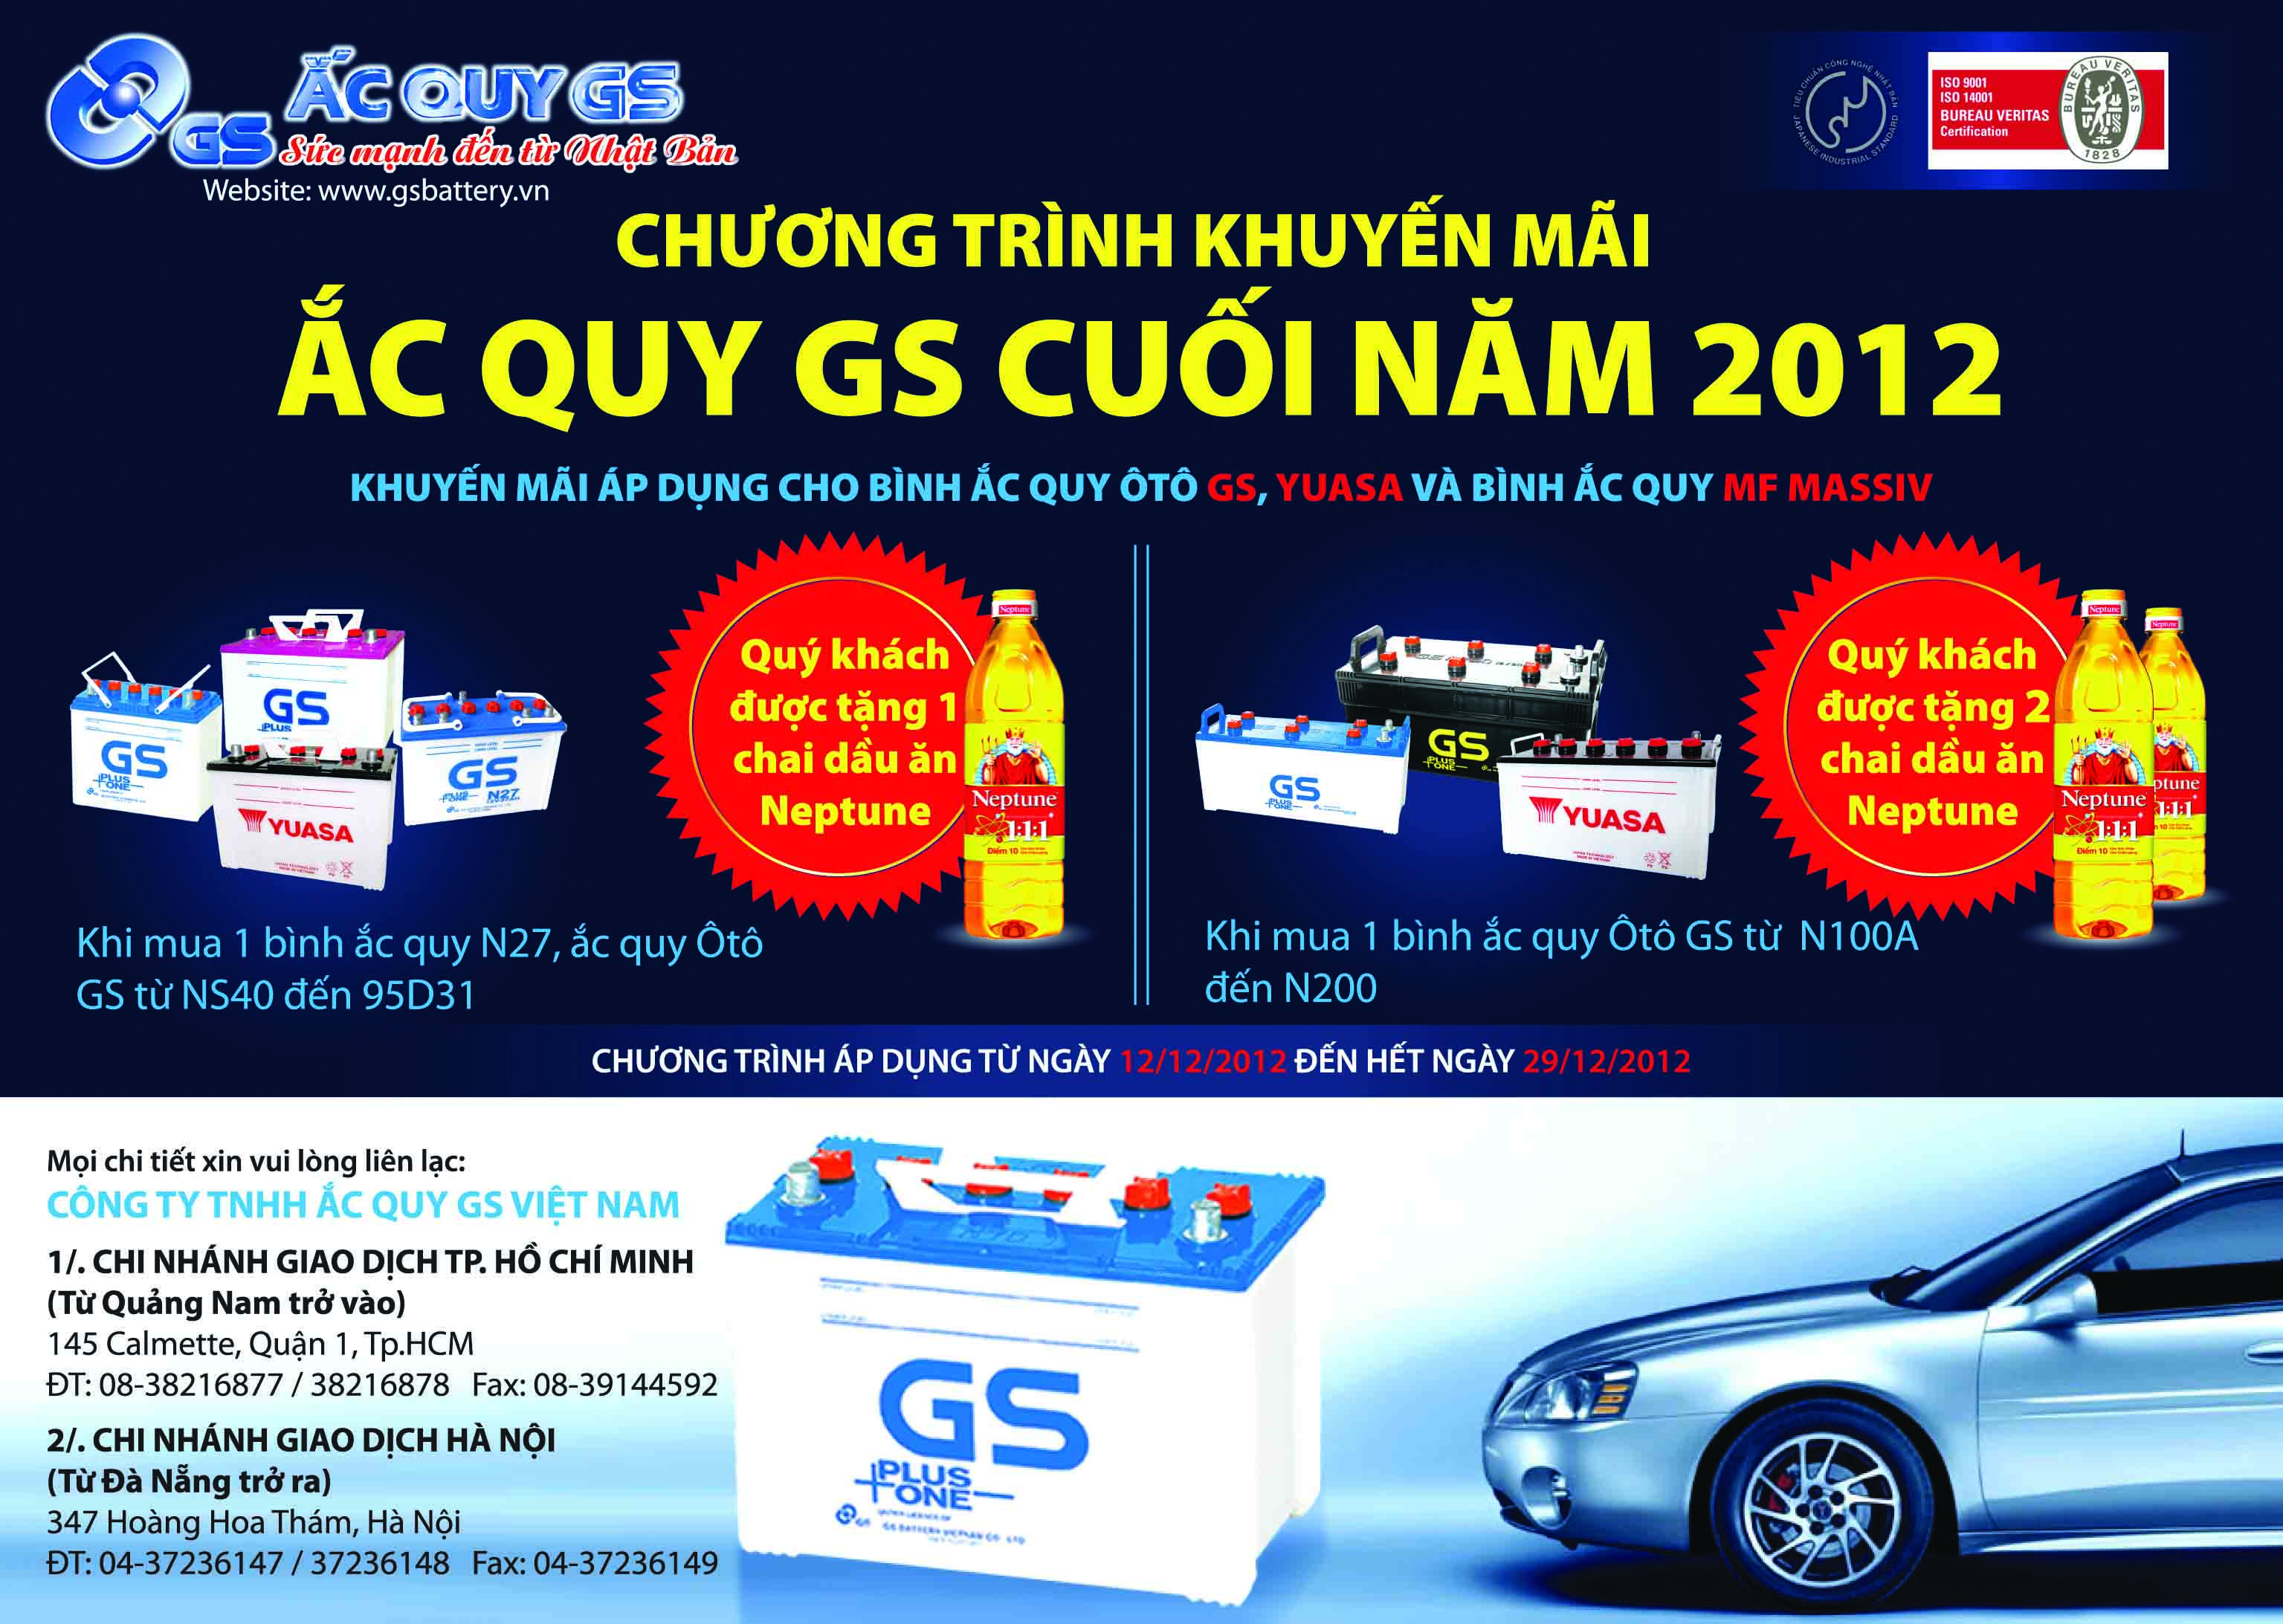 YEAR-END 2012 PROMOTION CAMPAIGN OF GS BATTERY